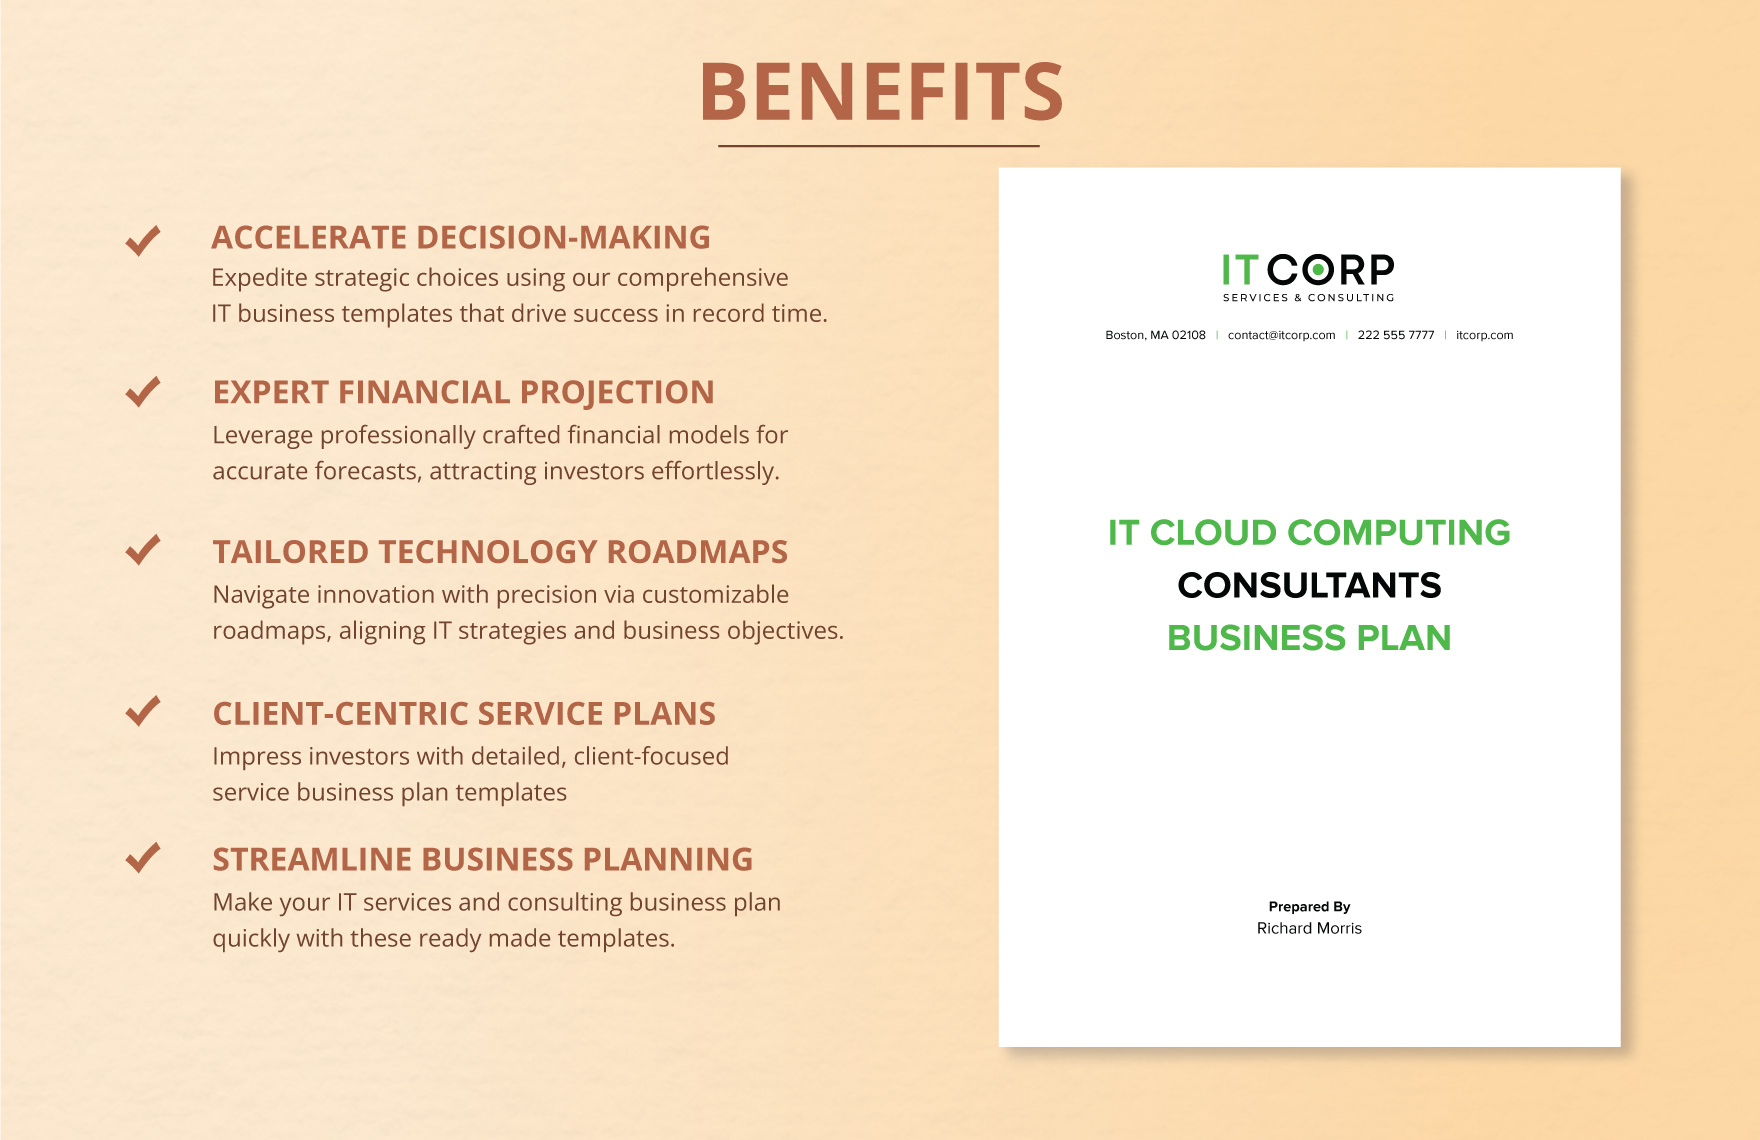 IT Cloud Computing Consultants Business Plan Template